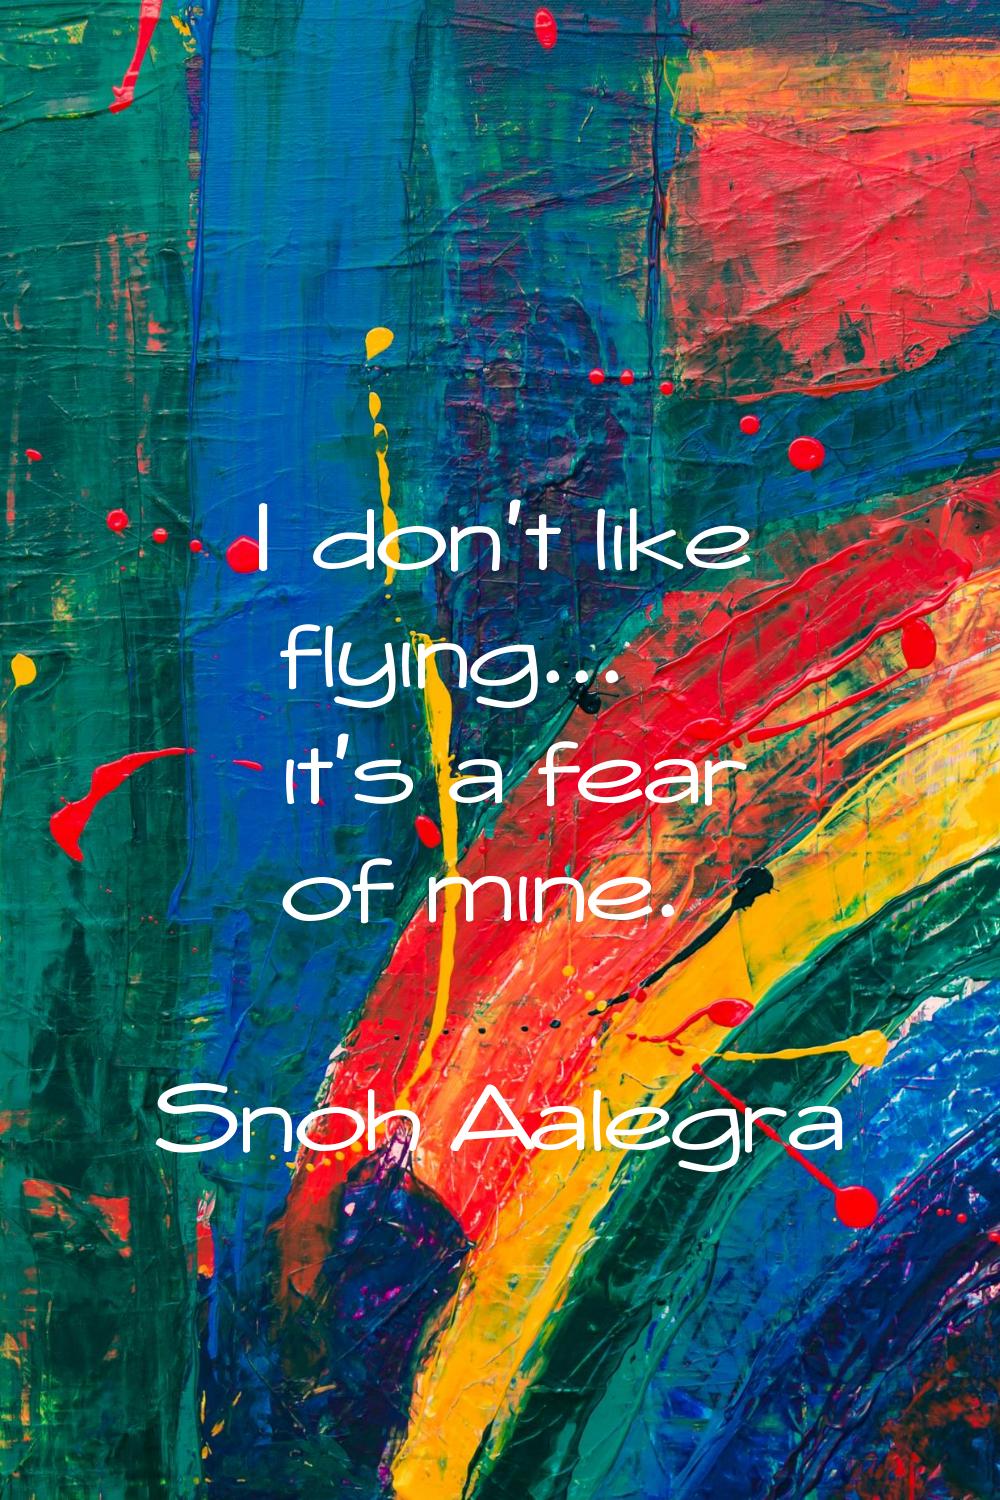 I don't like flying... it's a fear of mine.